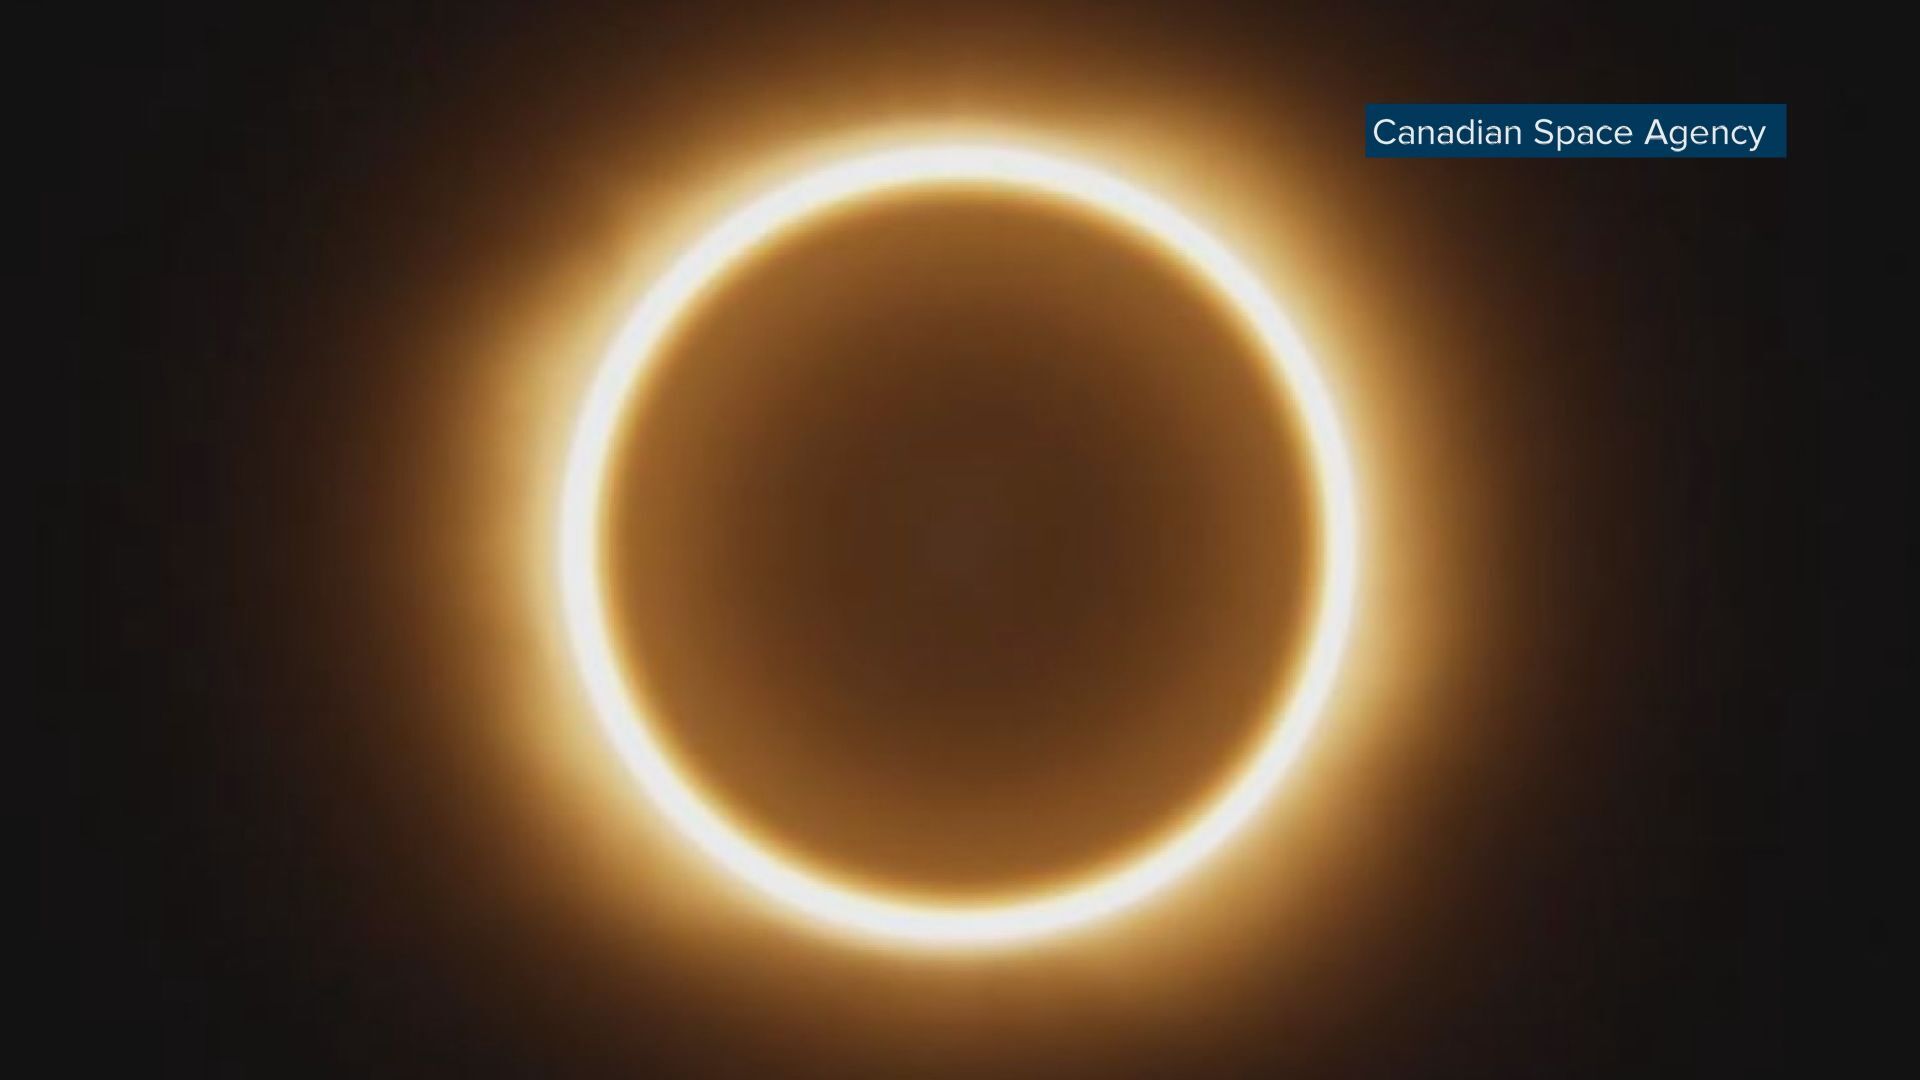 Annular solar eclipse live stream (10/14): How to watch watch 'ring of fire'  - al.com